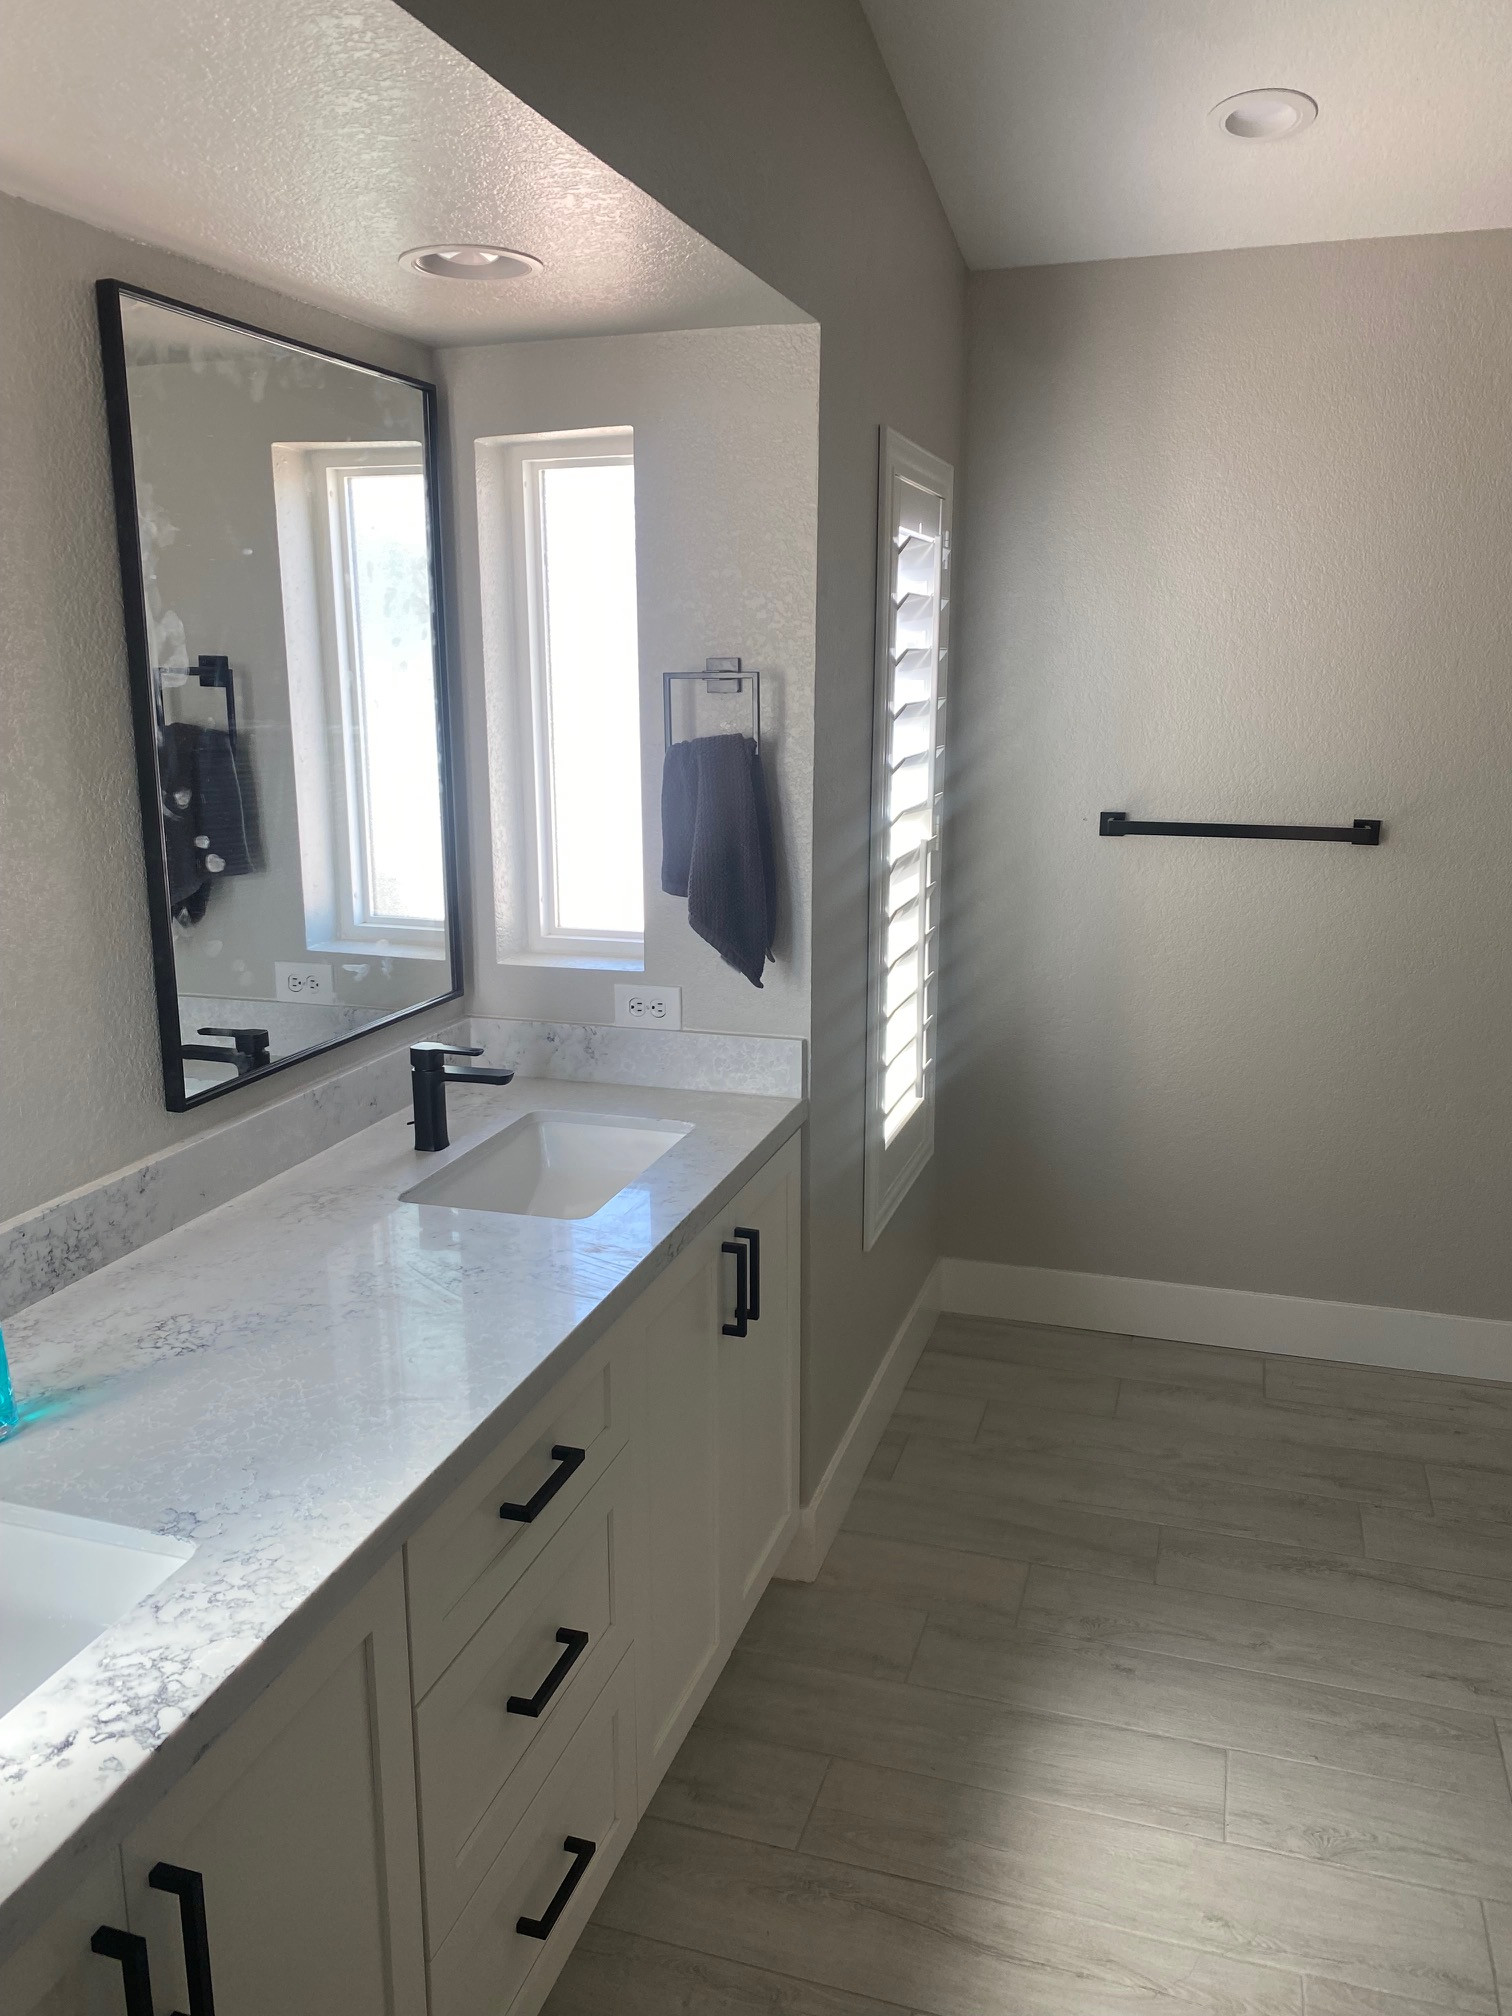 Kitchen and Baths Remodel - Build and Paint